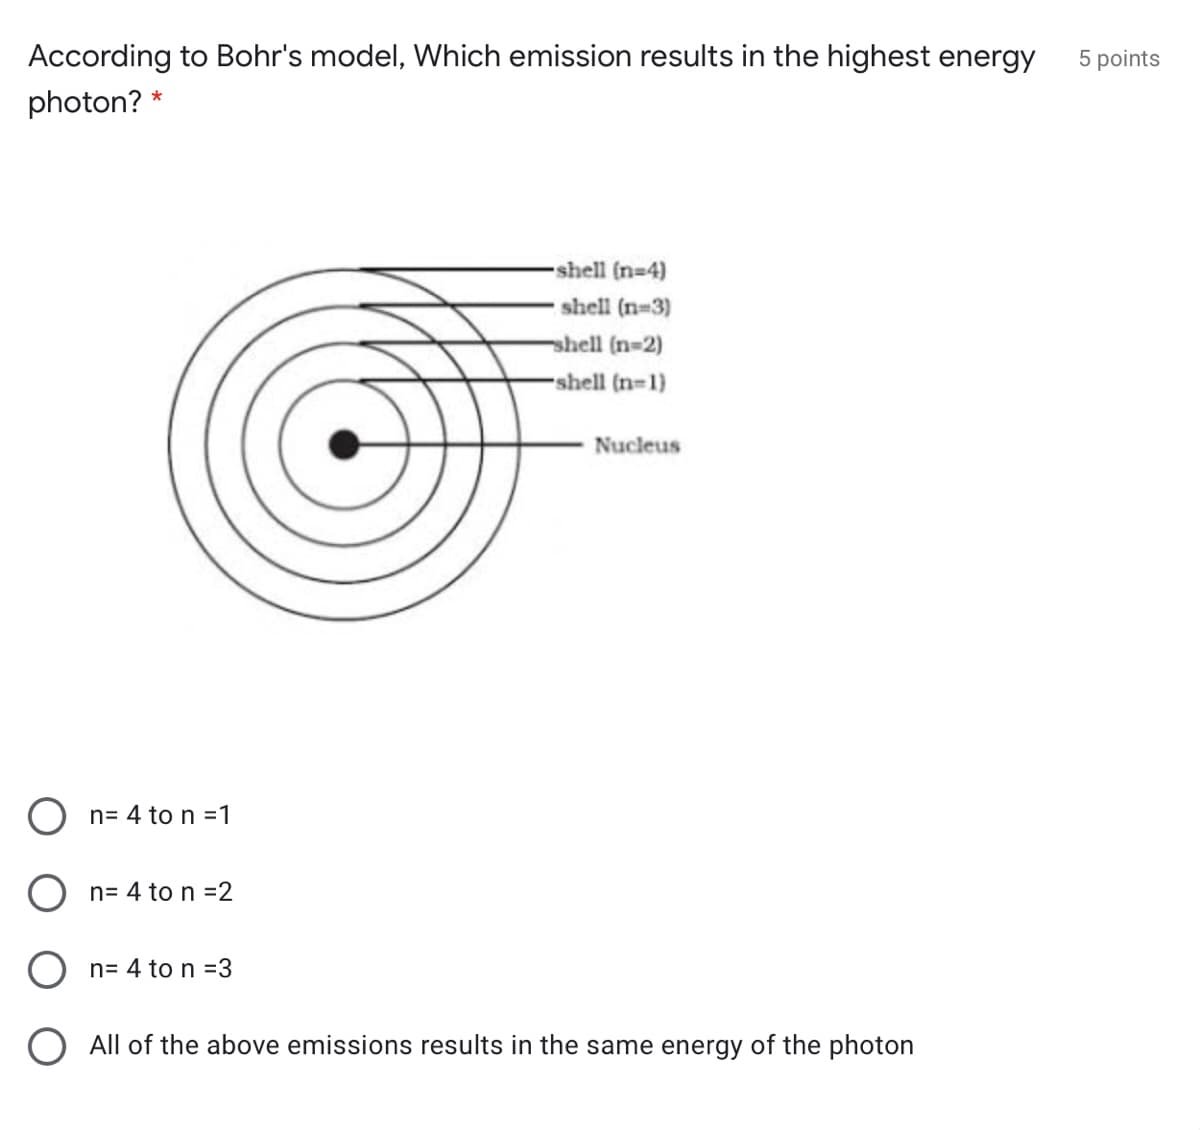 According to Bohr's model, Which emission results in the highest energy
5 points
photon? *
-shell (n-4)
shell (n-3)
shell (n-2)
-shell (n=1)
Nucleus
O n= 4 to n =1
O n= 4 to n =2
n= 4 to n =3
All of the above emissions results in the same energy of the photon
